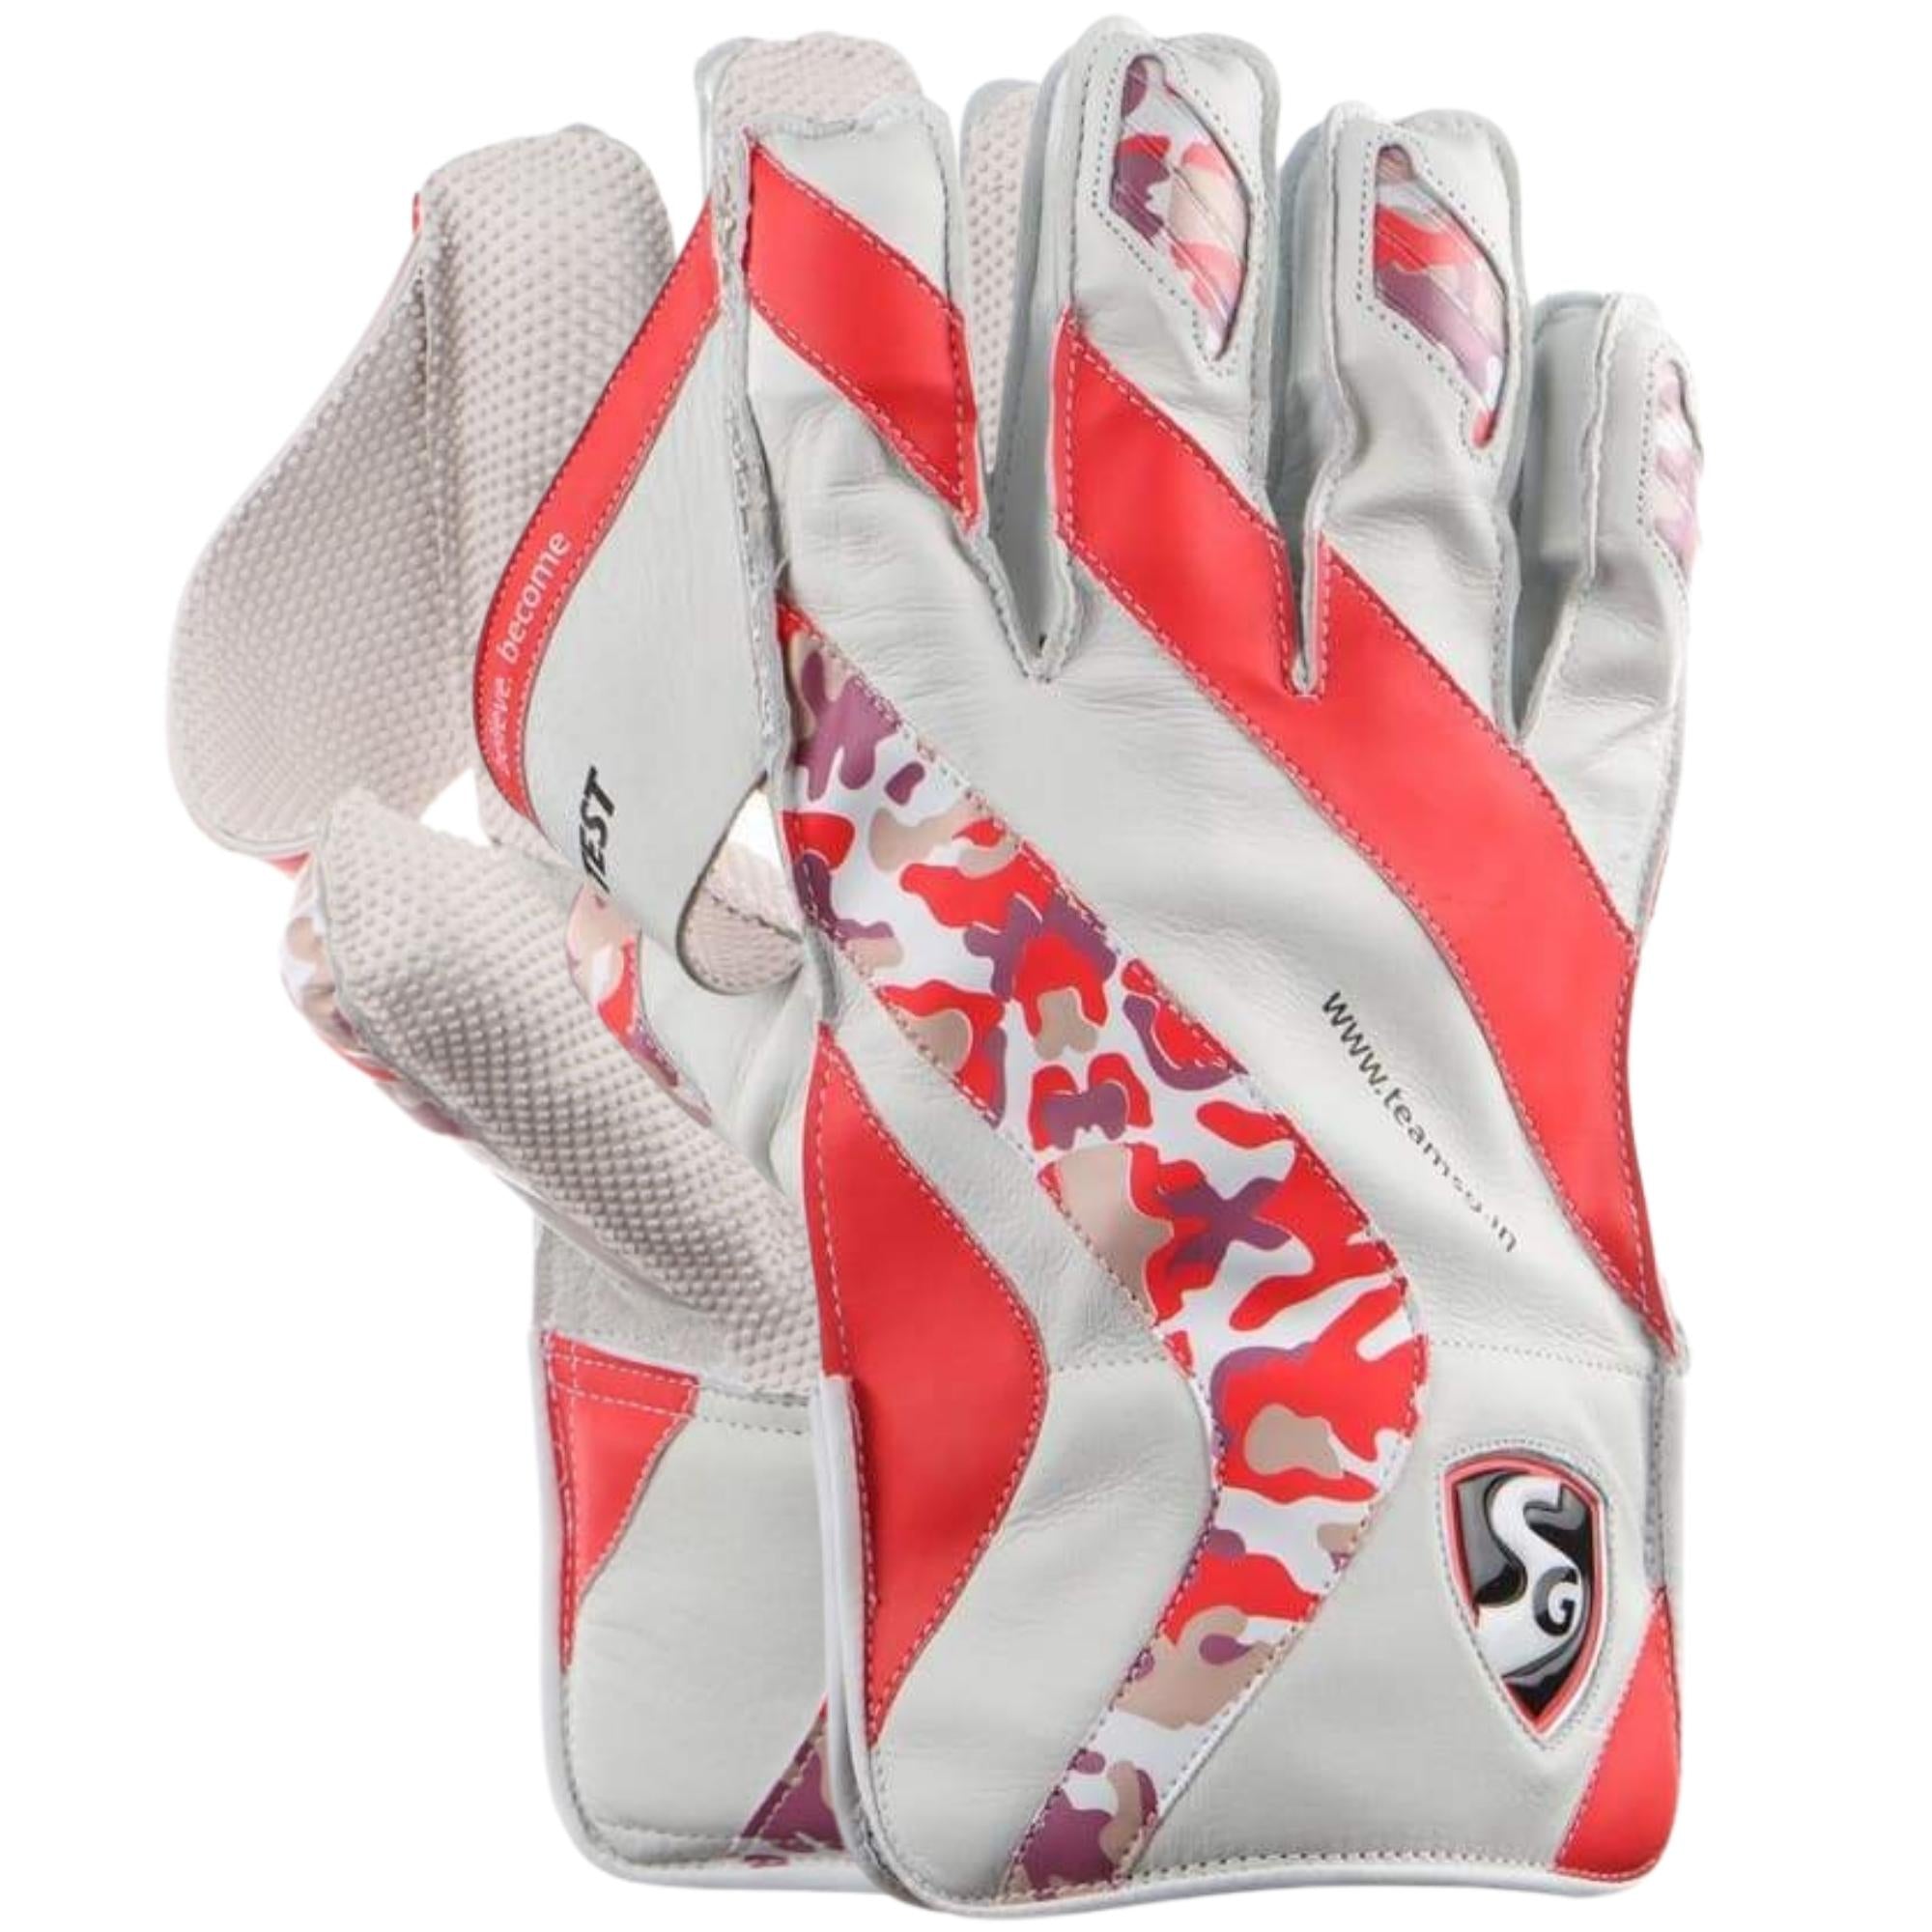 SG Wicket Keeping Gloves | SG Test